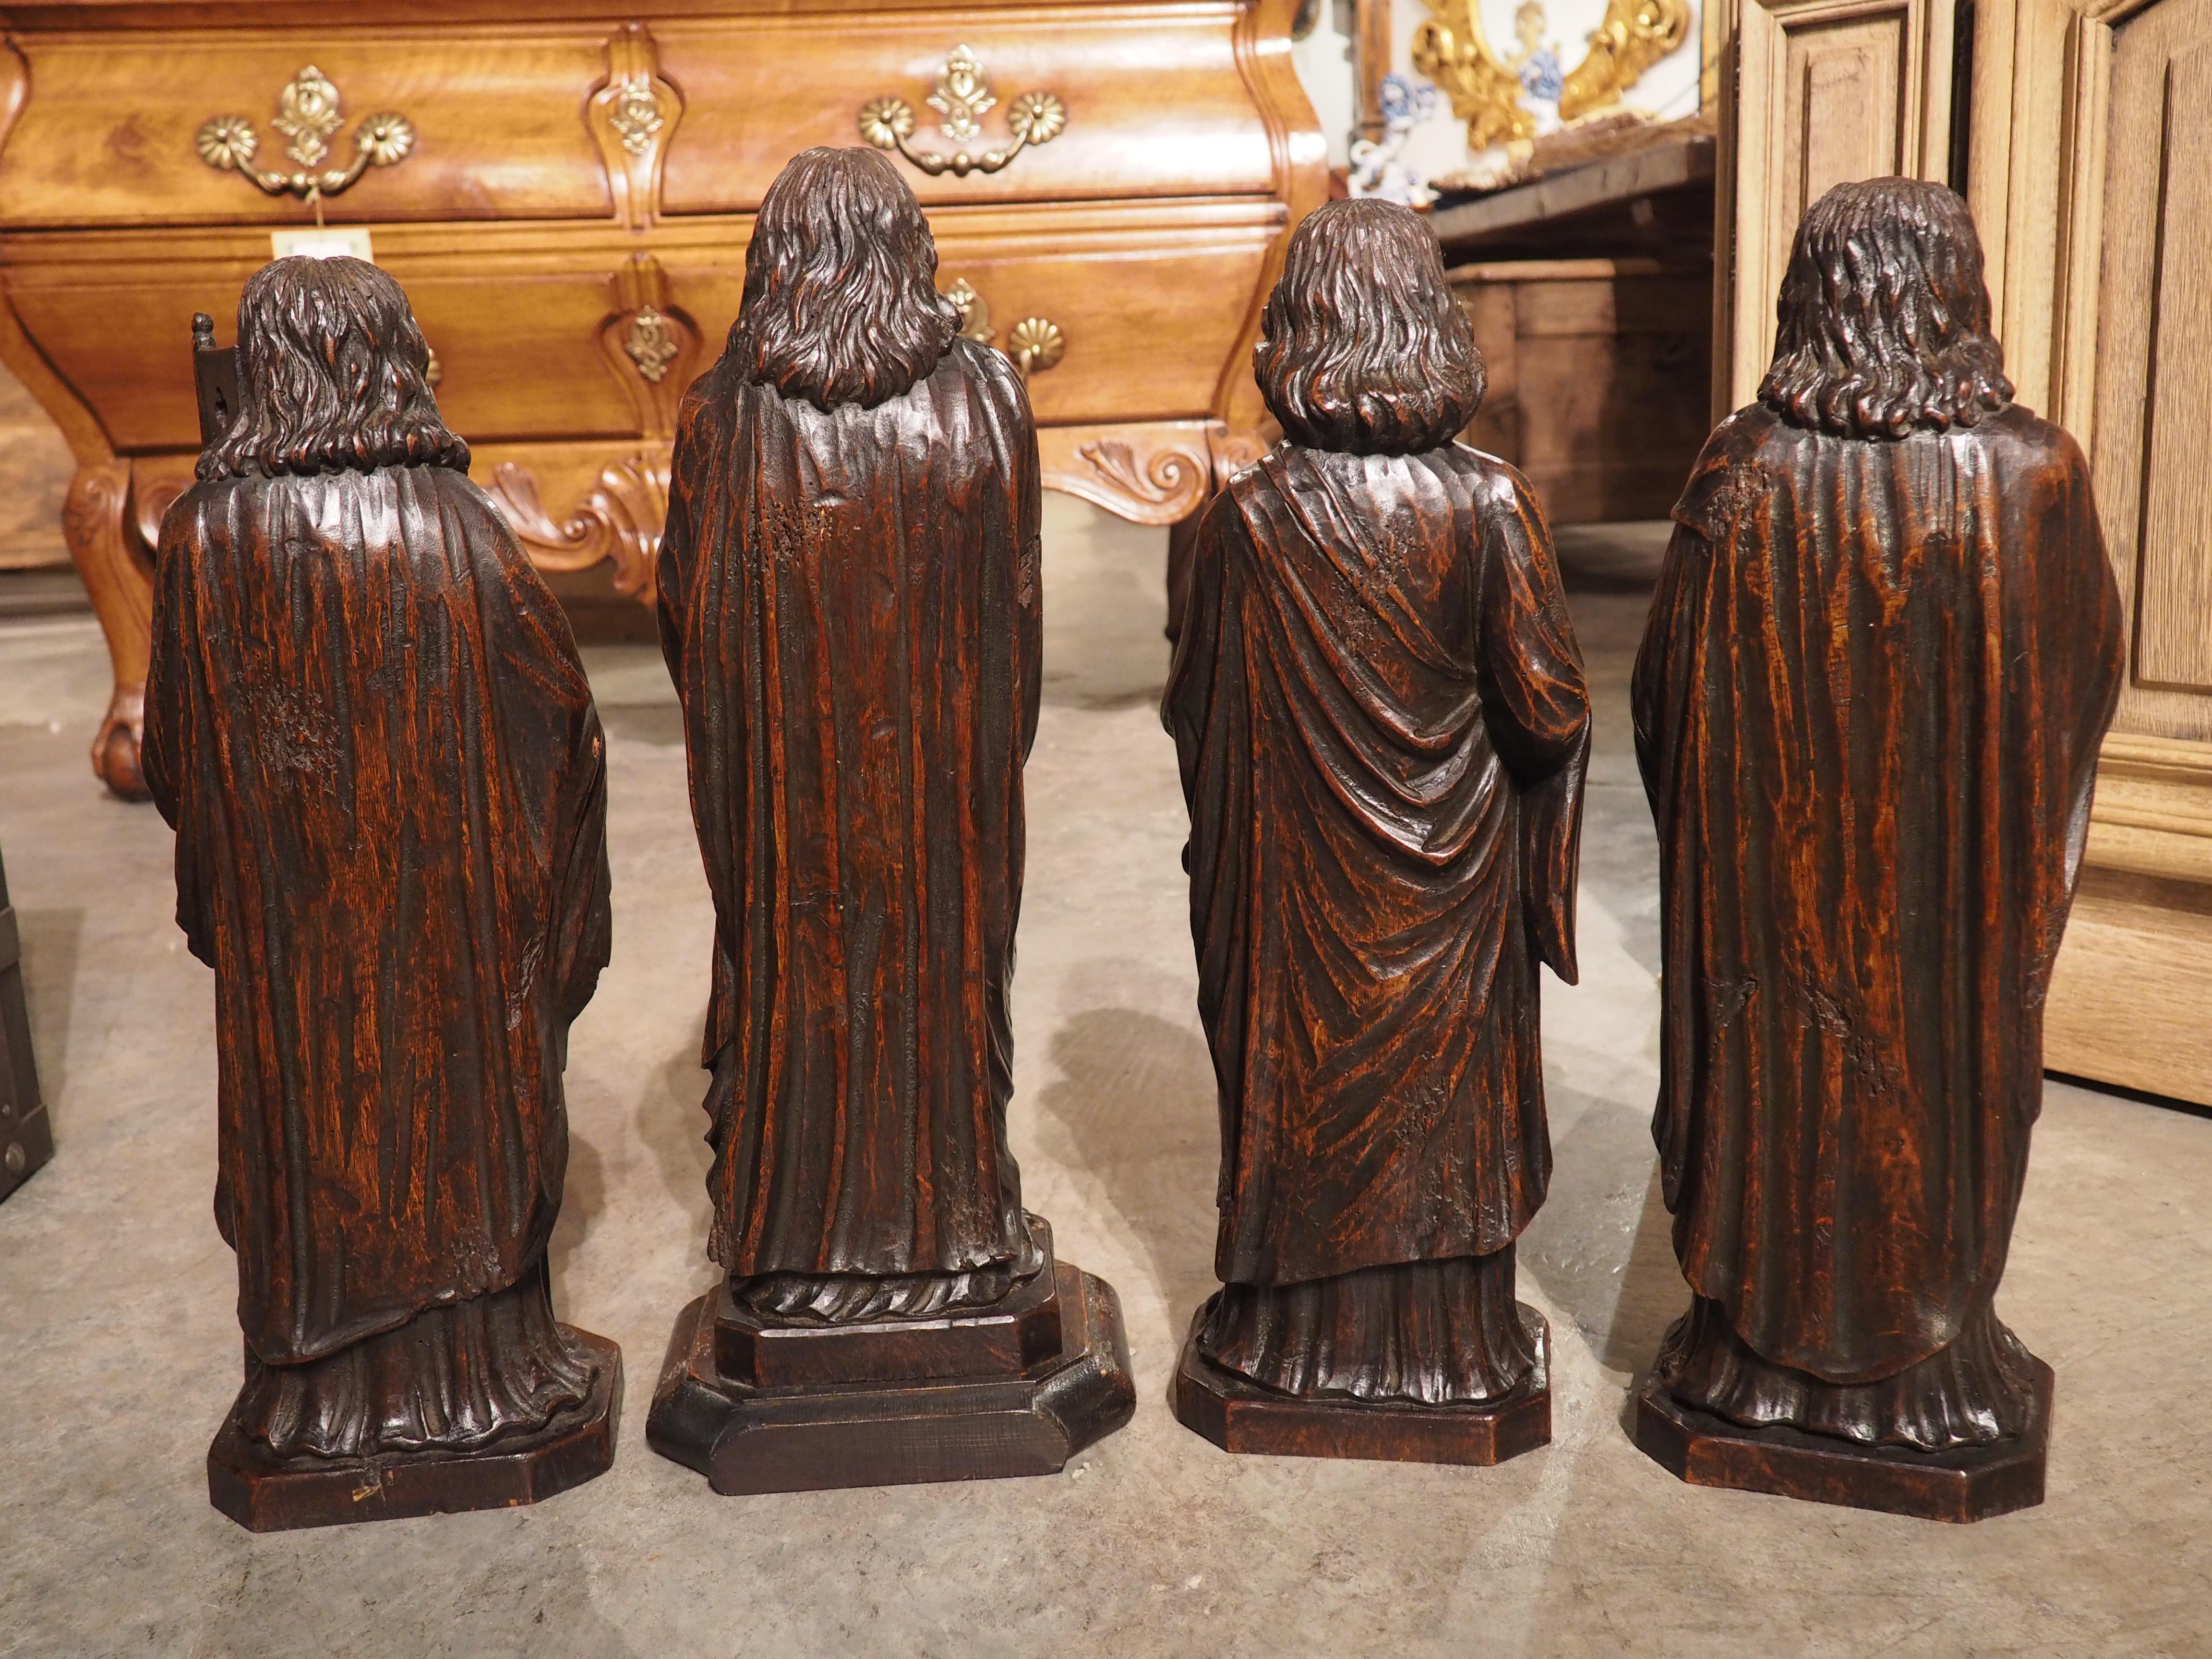 Circa 1800 Carved Oak Sculptures of the Apostles, James, John, Peter, and Paul For Sale 6